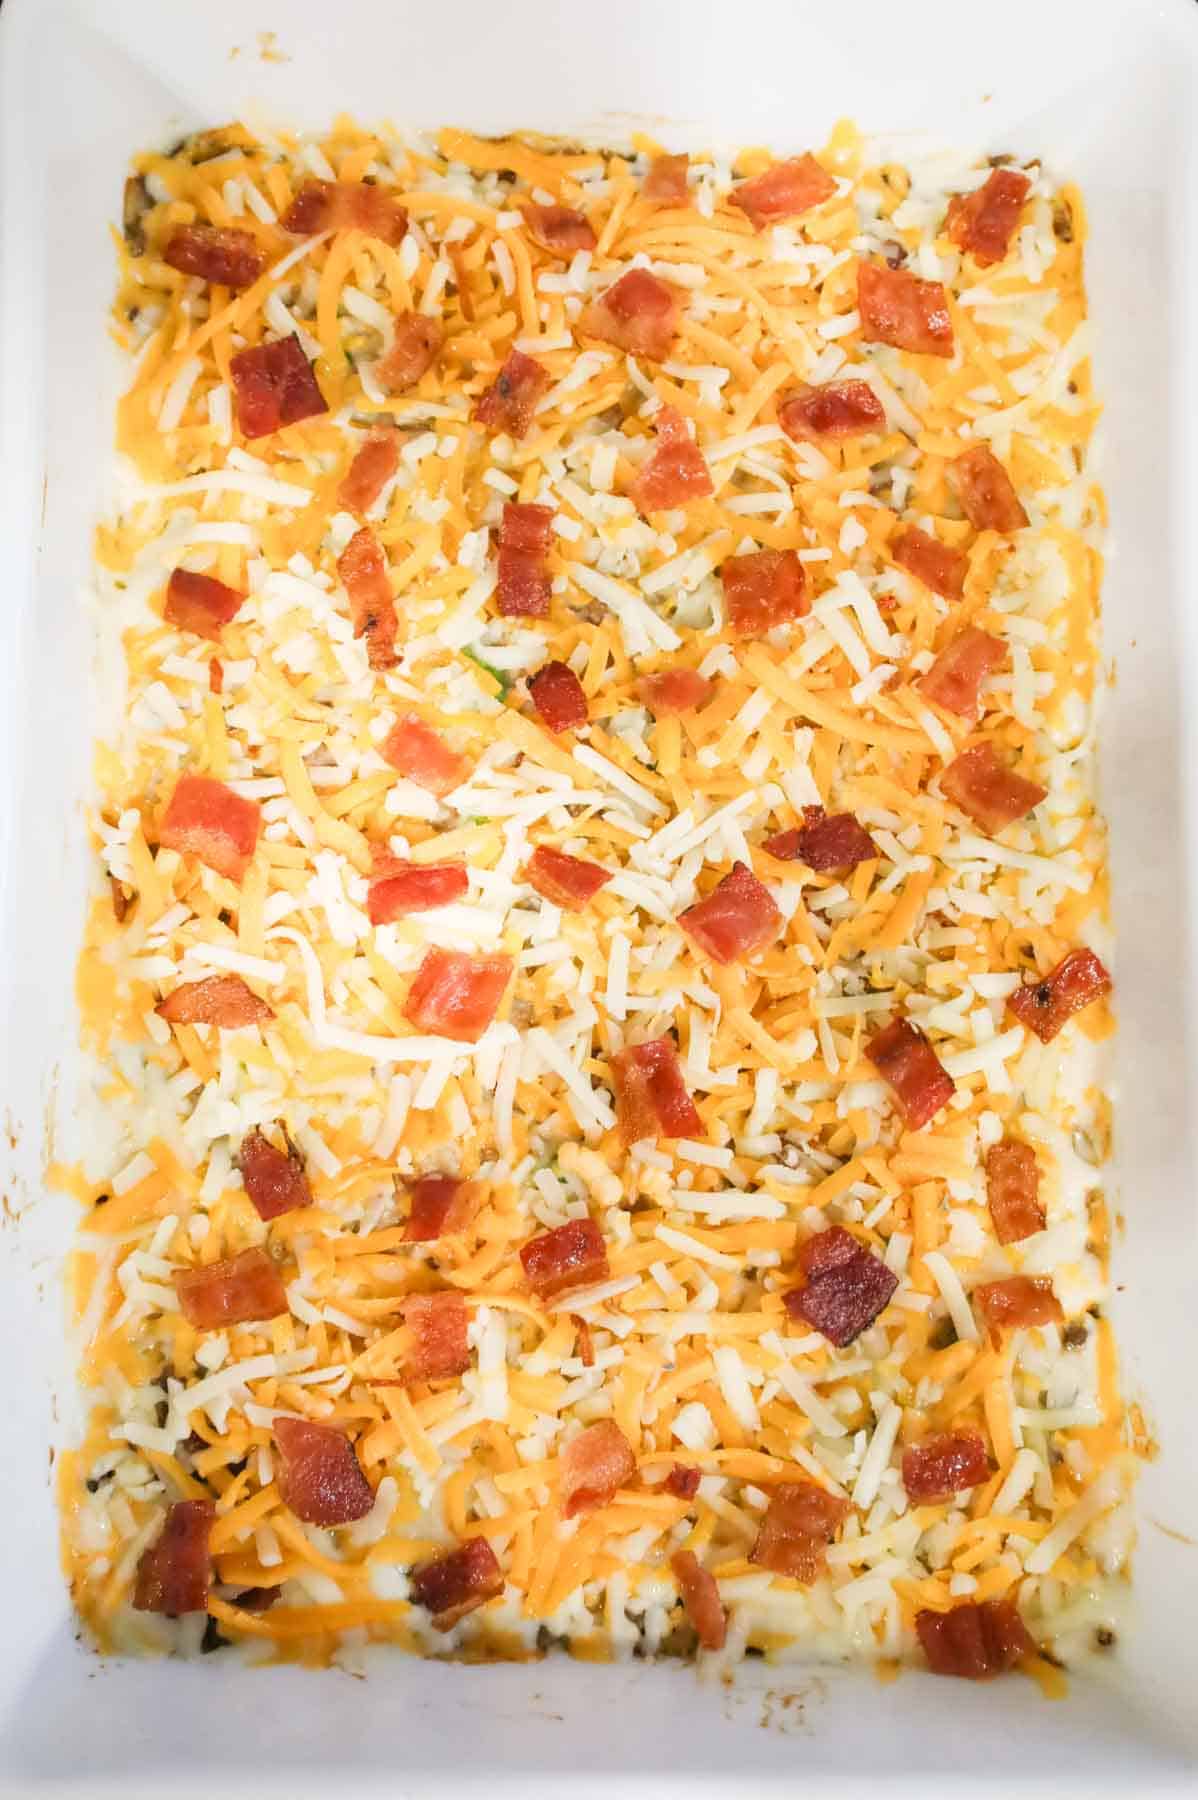 shredded cheese and cooked bacon pieces on top of creamy ground beef and rice mixture in a baking dish